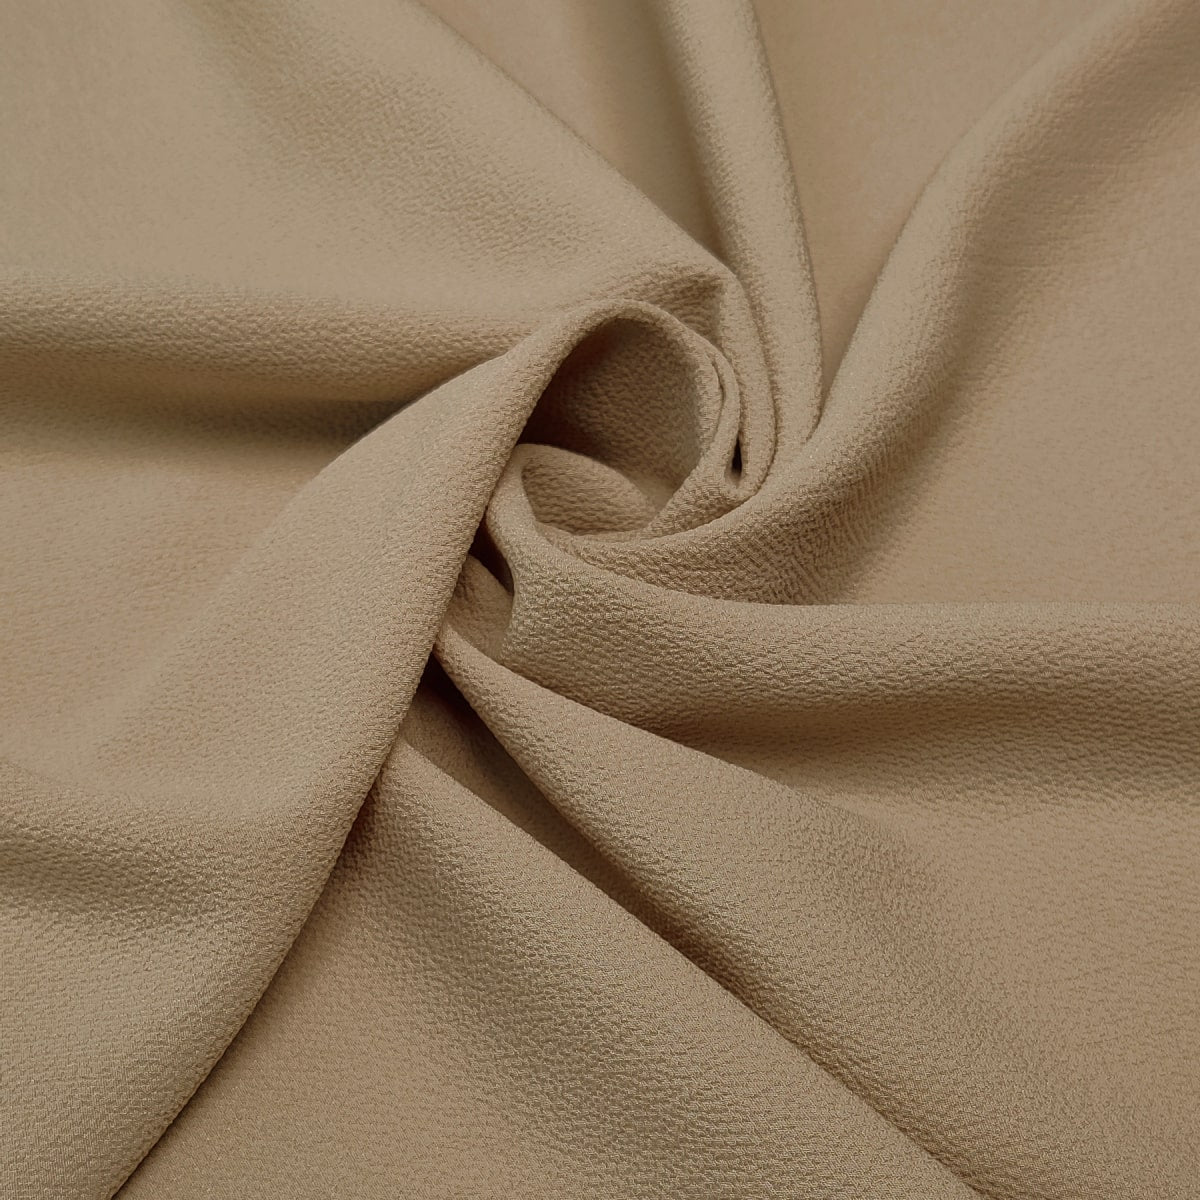 Crepe fabric : 108-110 gsm, Greige, Plain Suppliers 16114476 - Wholesale  Manufacturers and Exporters